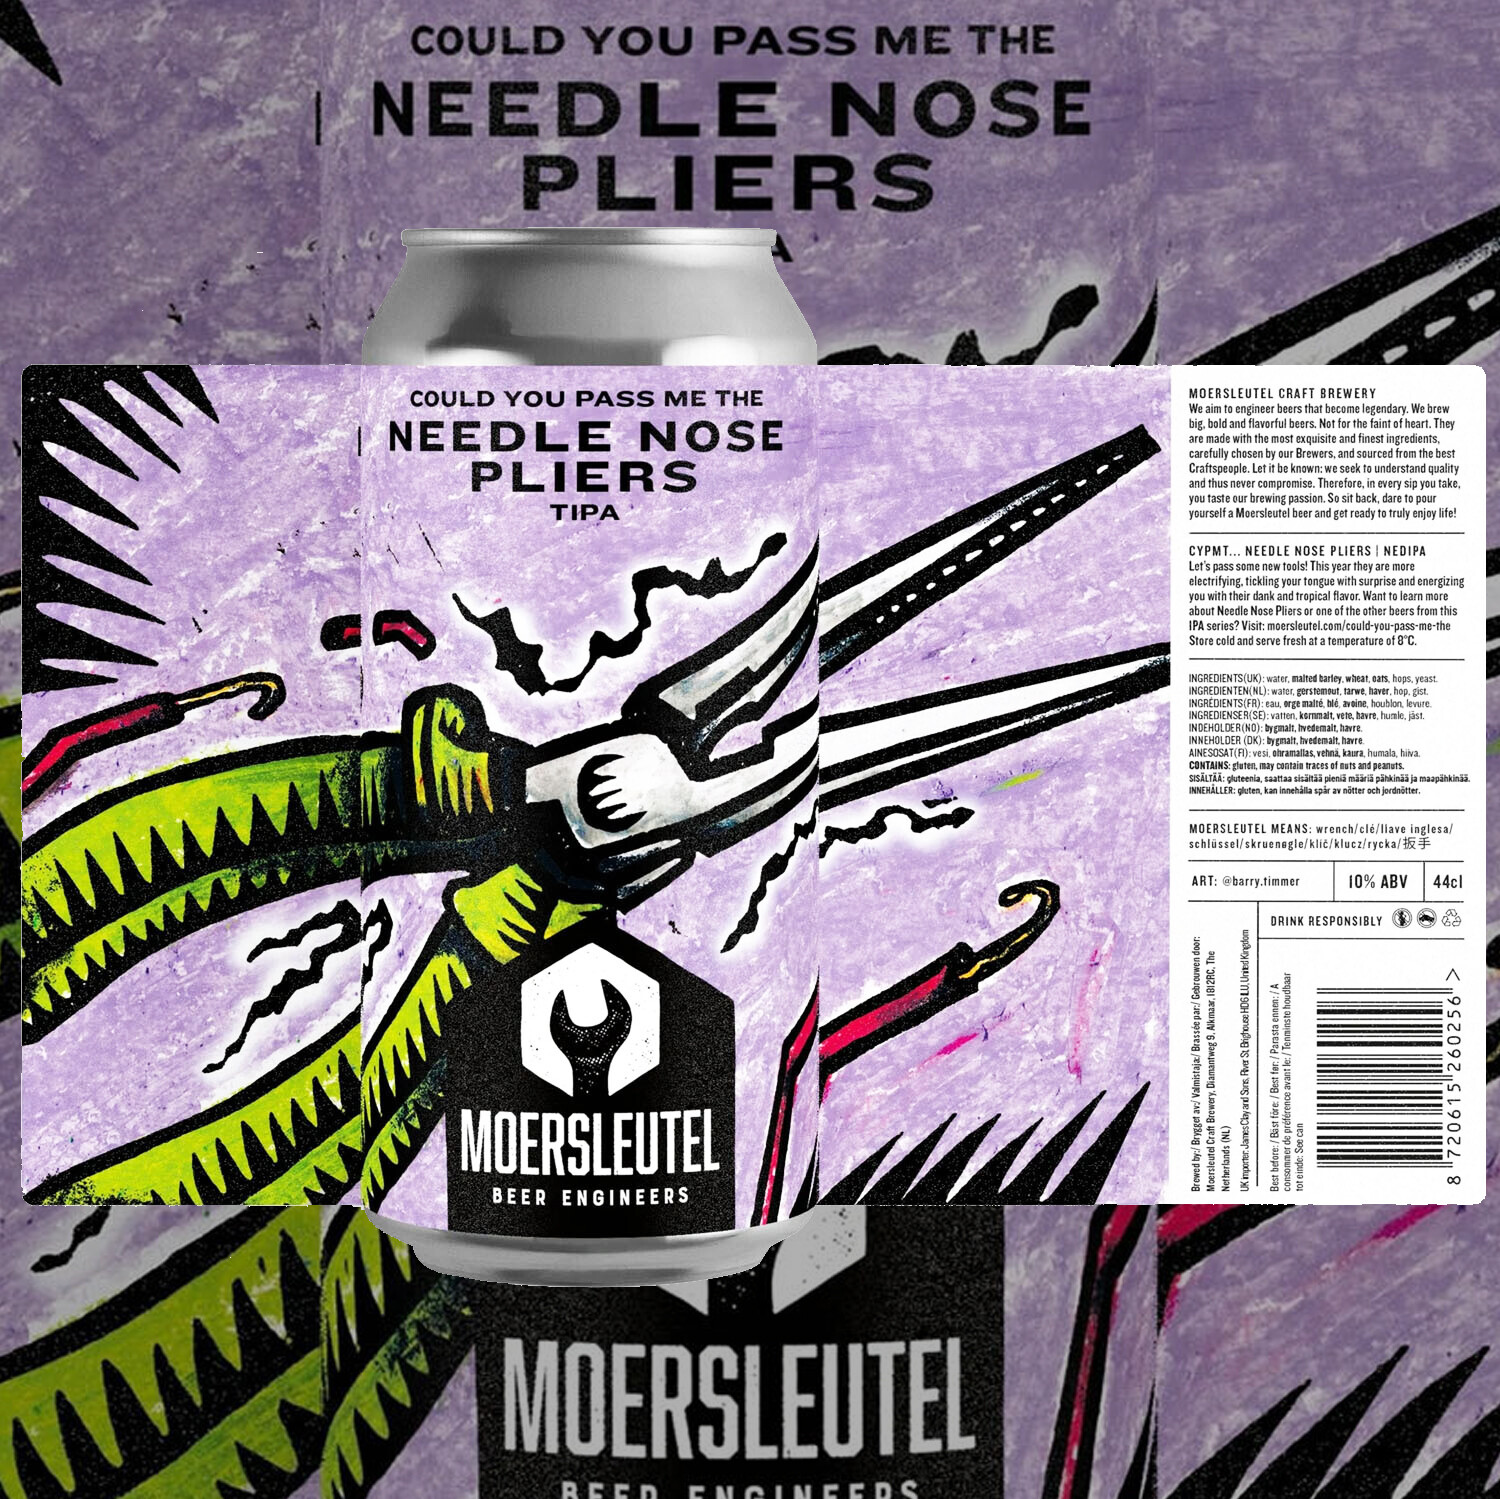 De Moersleutel Could You Pass Me The Needle Nose Pliers TIPA